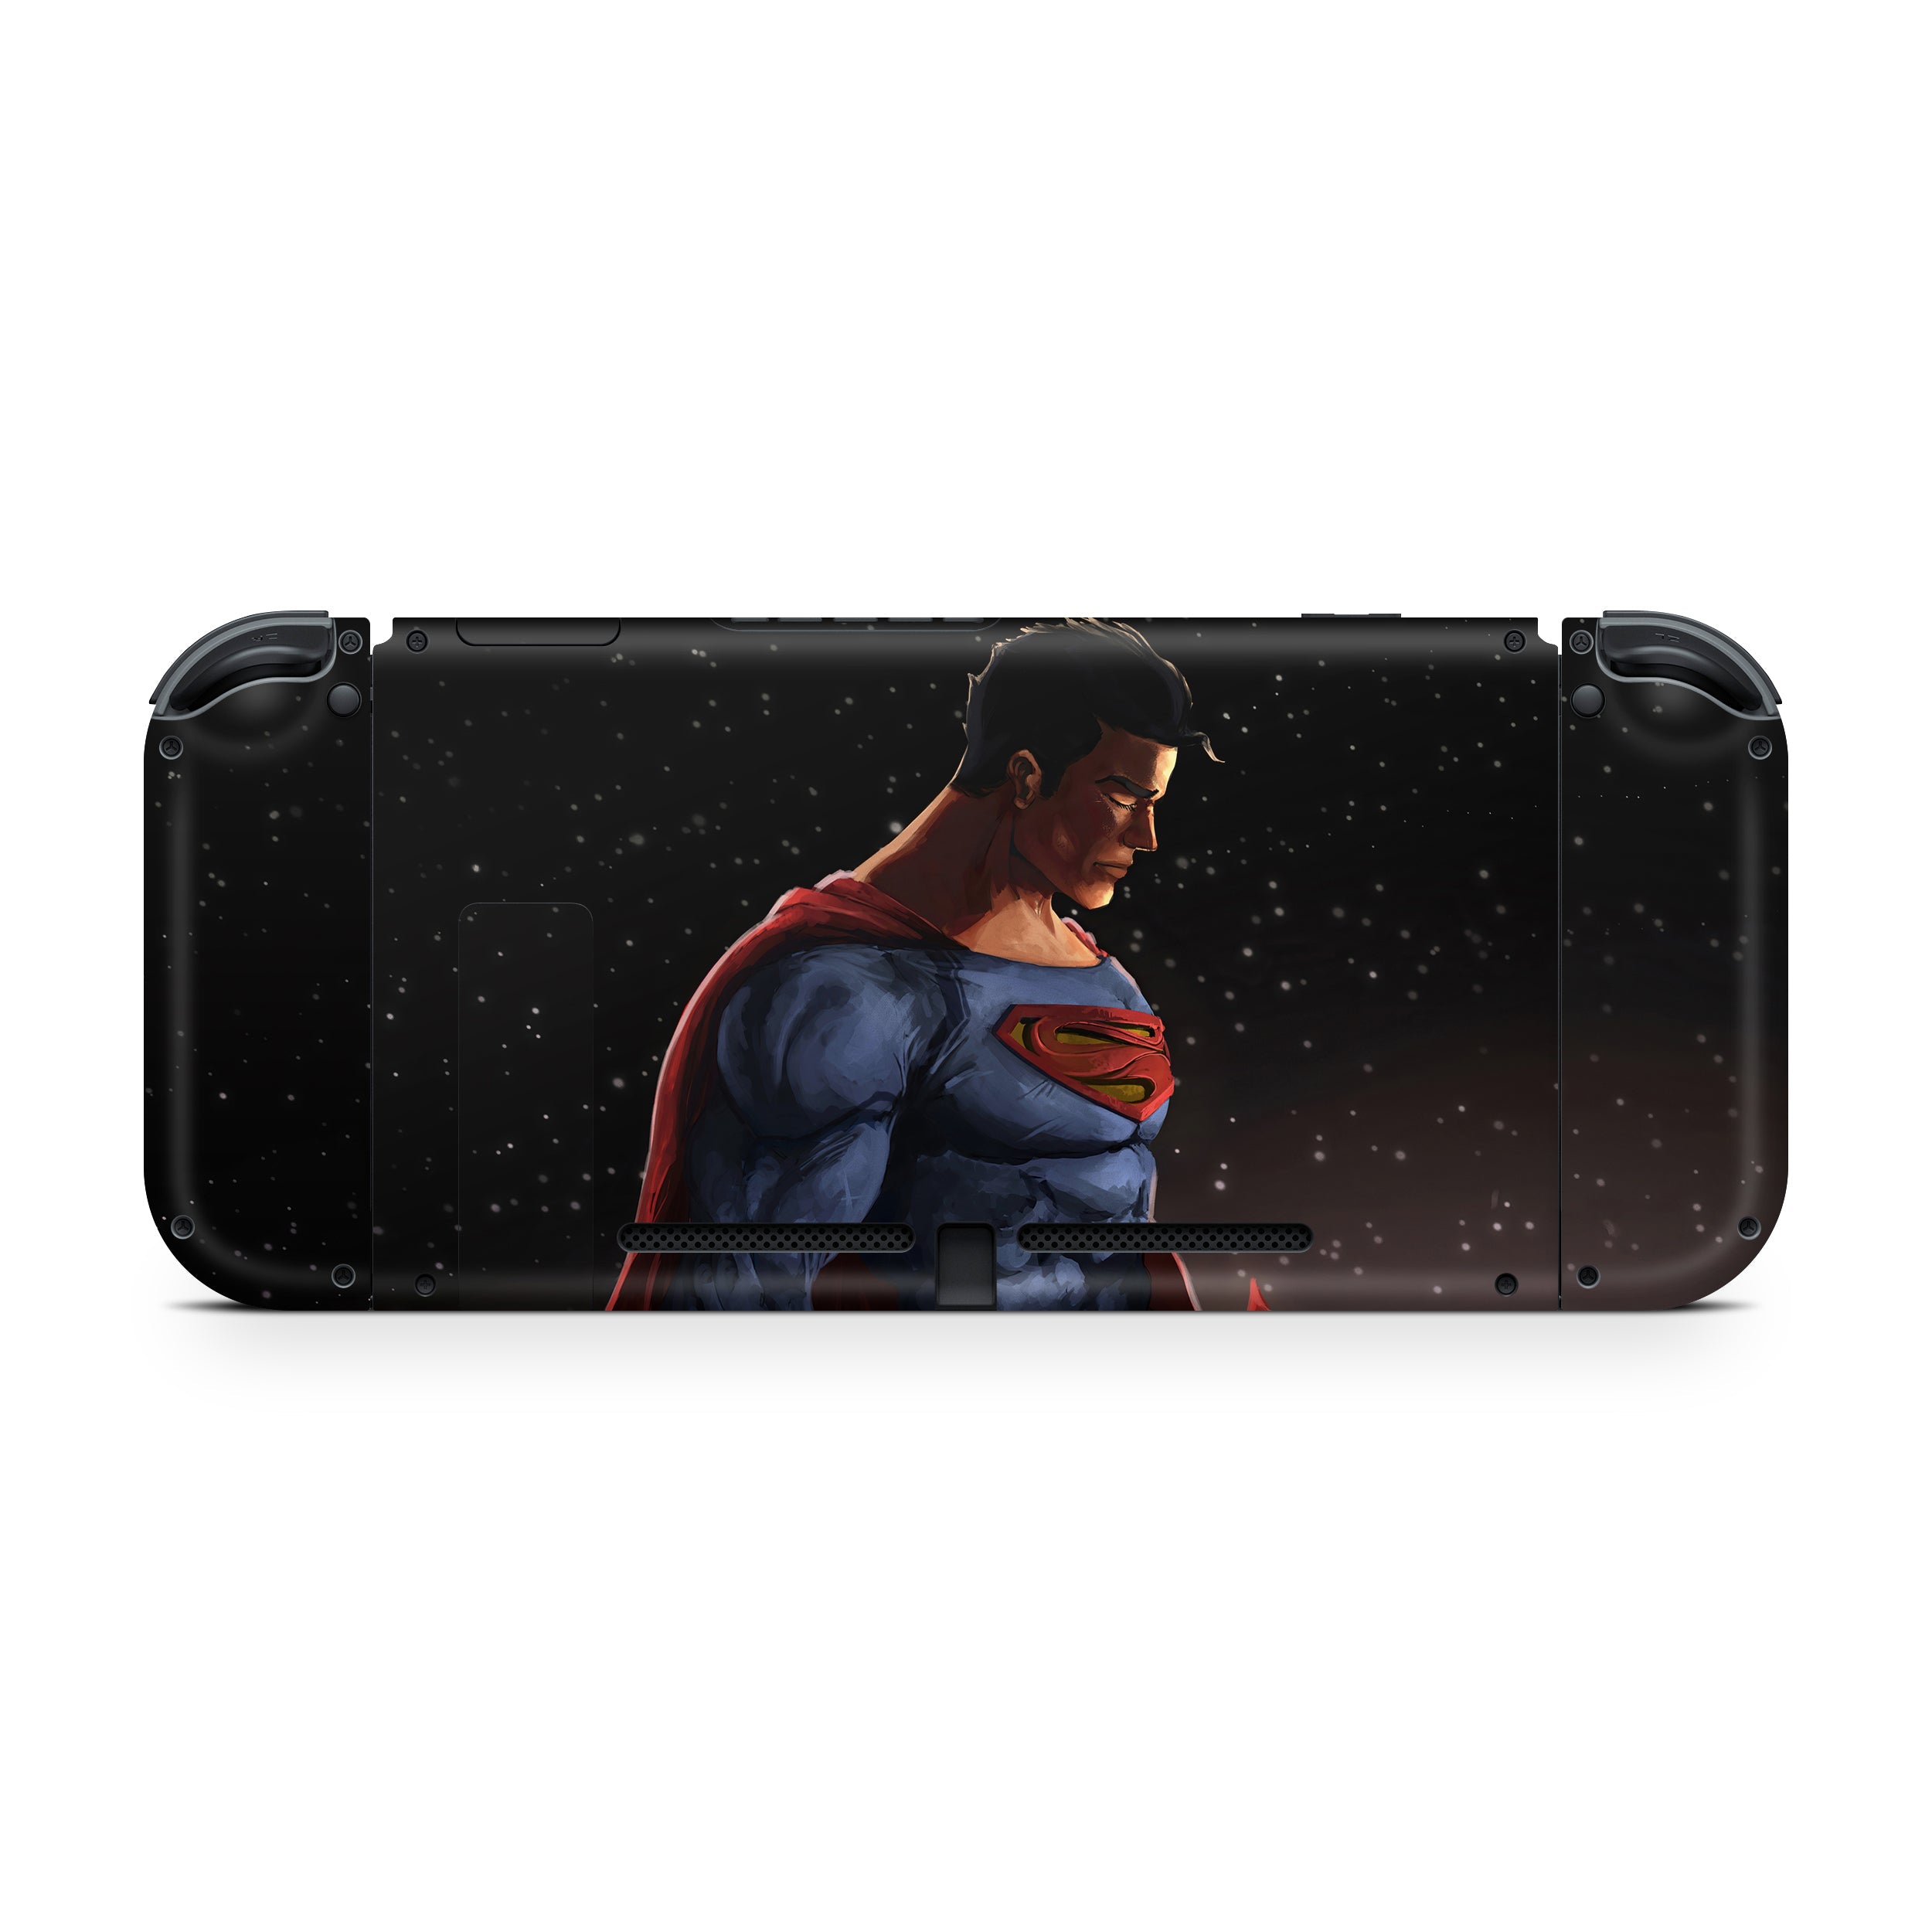 A video game skin featuring a DC Comics Superman design for the Nintendo Switch.